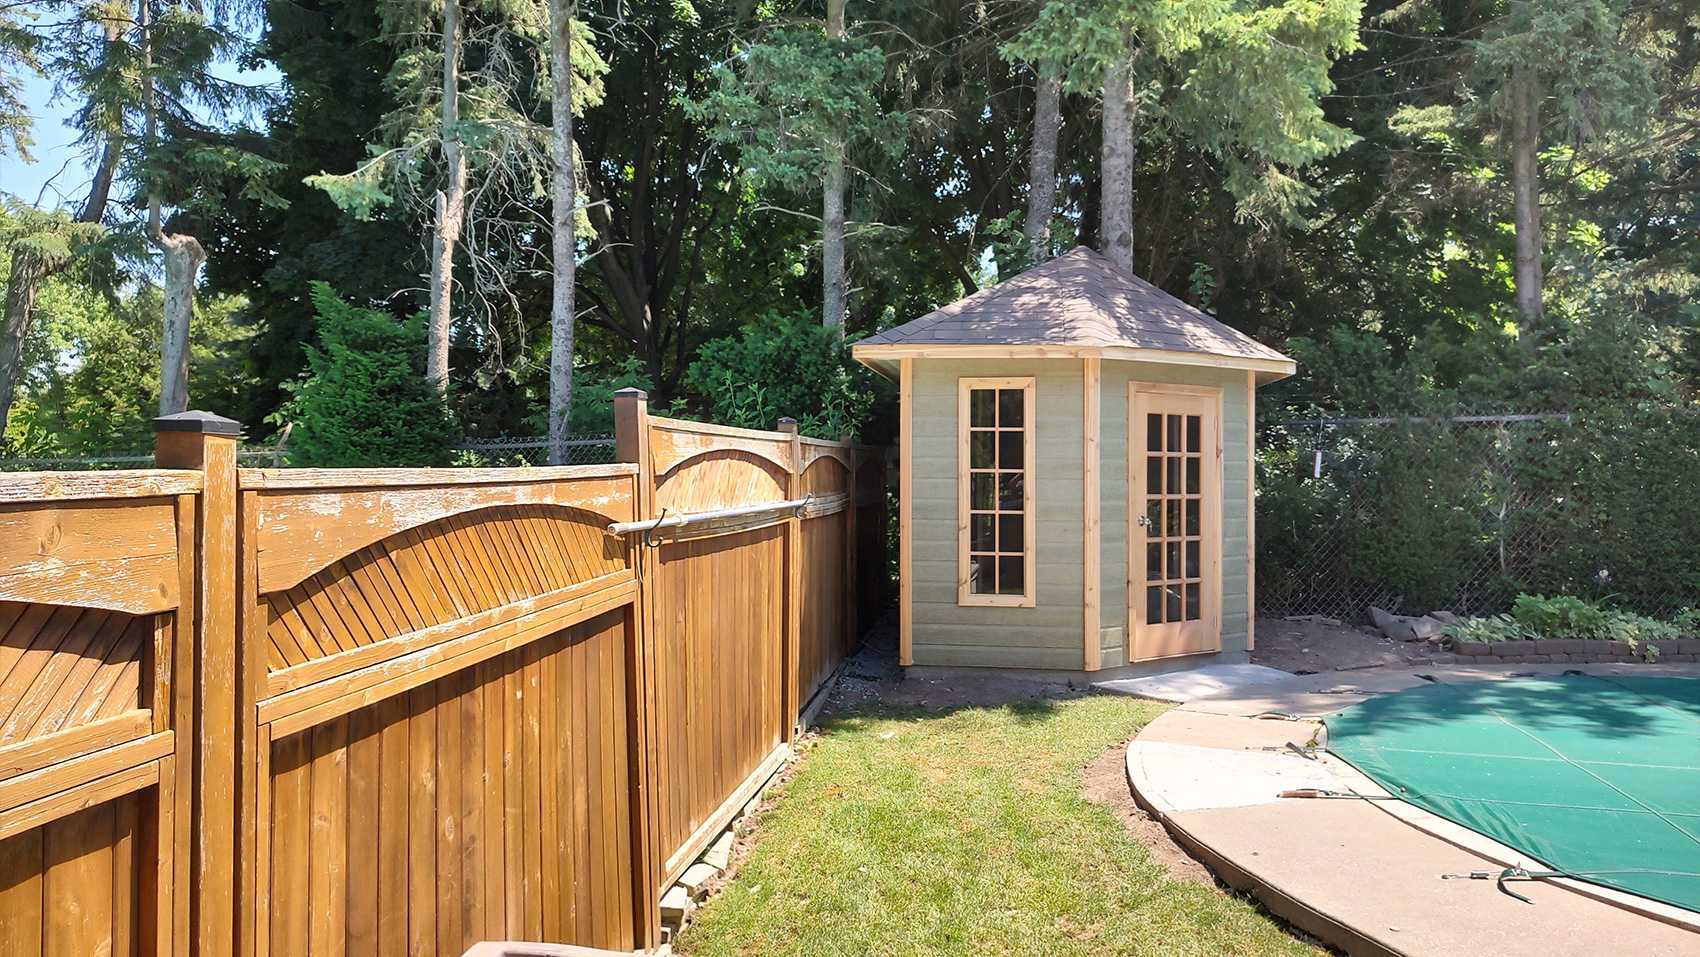 Front Left view of 8' Catalina Pool house located in Thornhill, Ontario – Summerwood Products